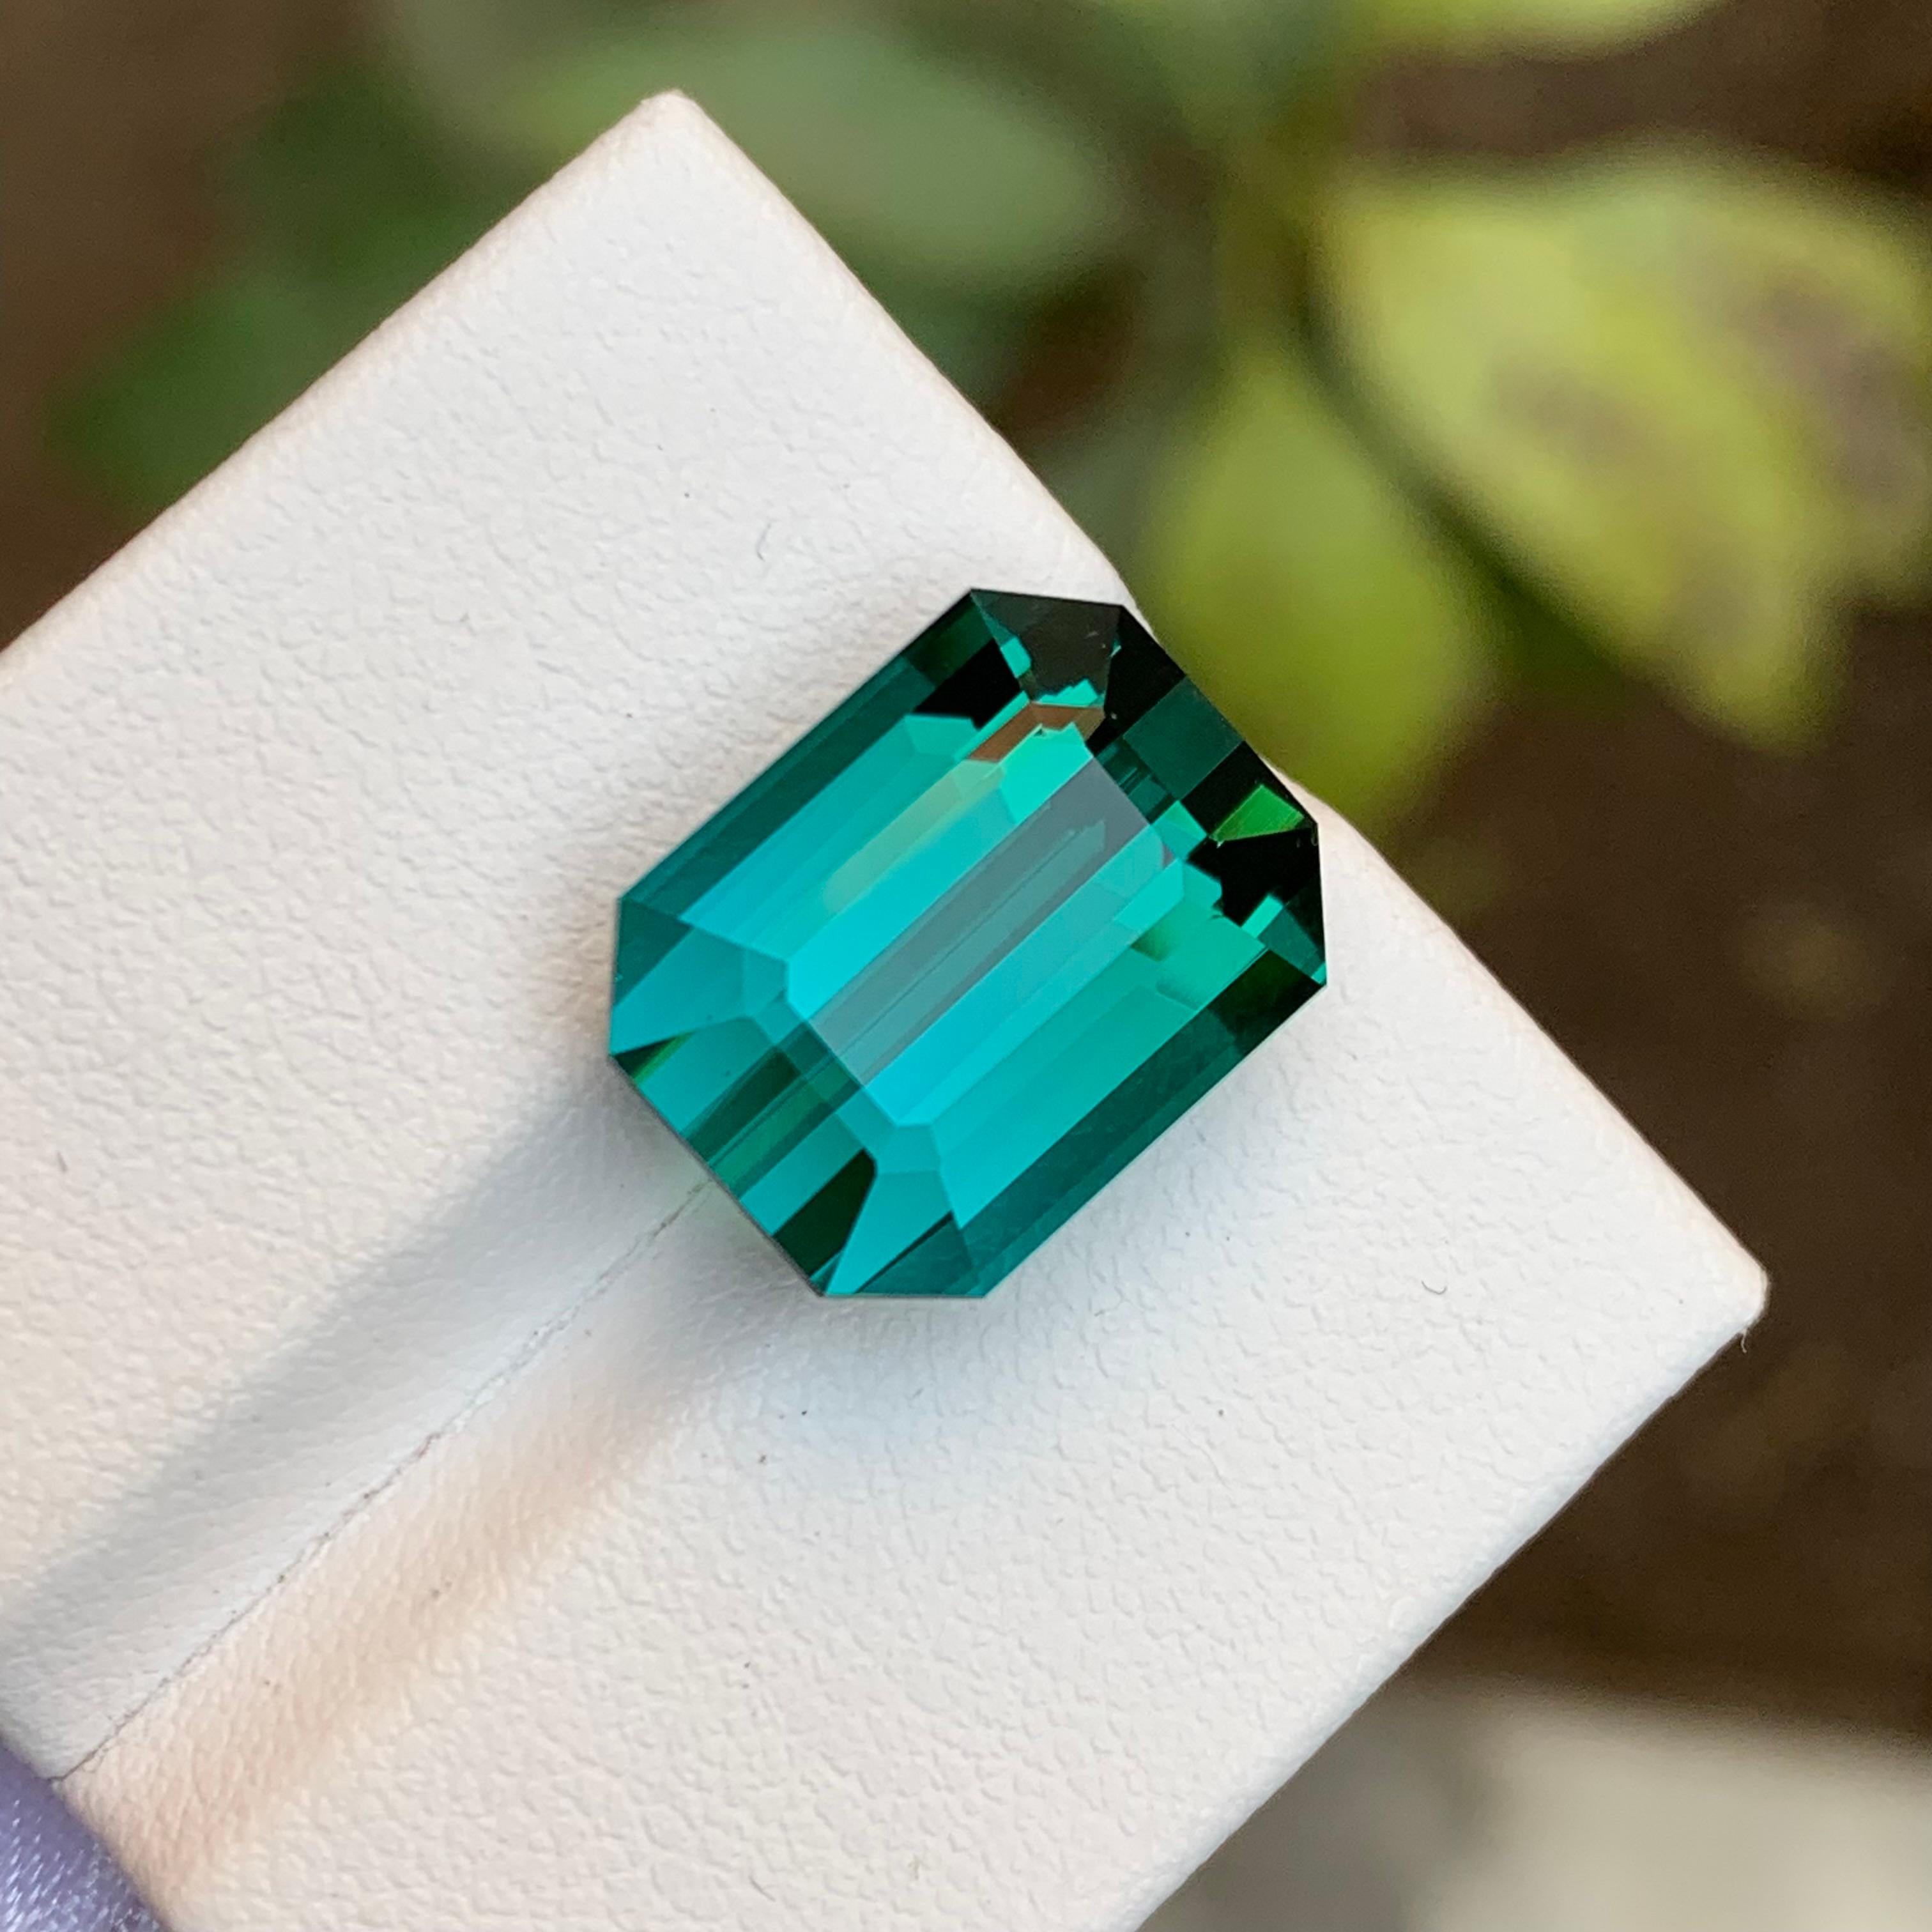 Contemporary Rare Greenish Blue Flawless Natural Tourmaline Gemstone, 13.05 Ct Emerald Cut Af For Sale